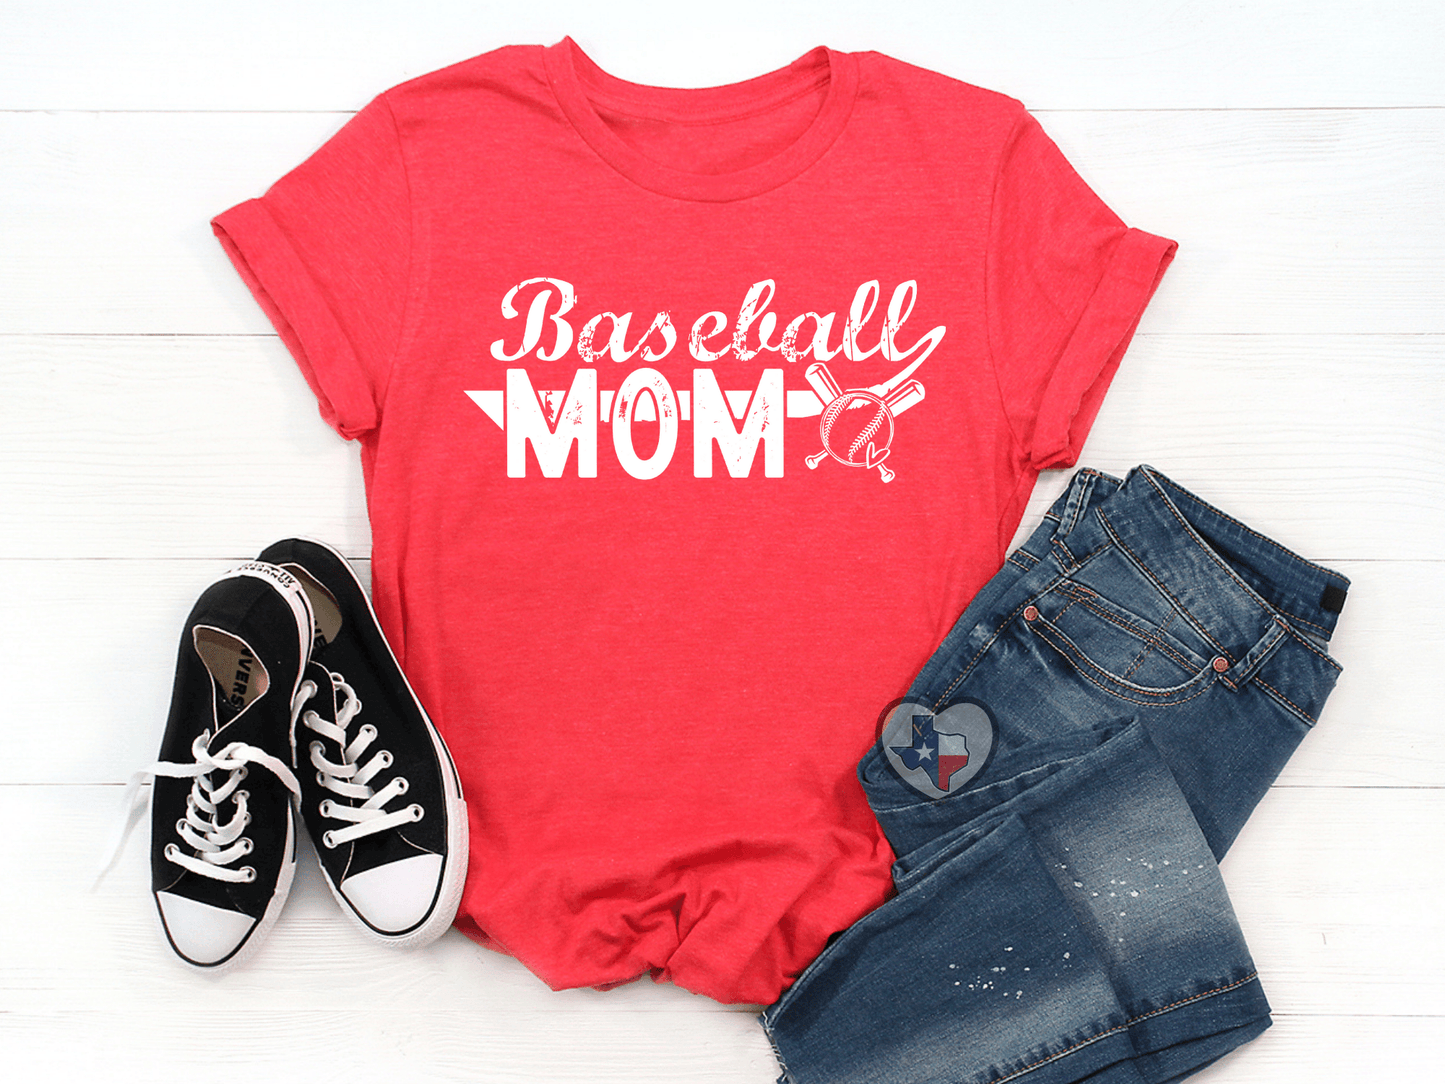 Baseball Mom *EXCLUSIVE* - Texas Transfers and Designs